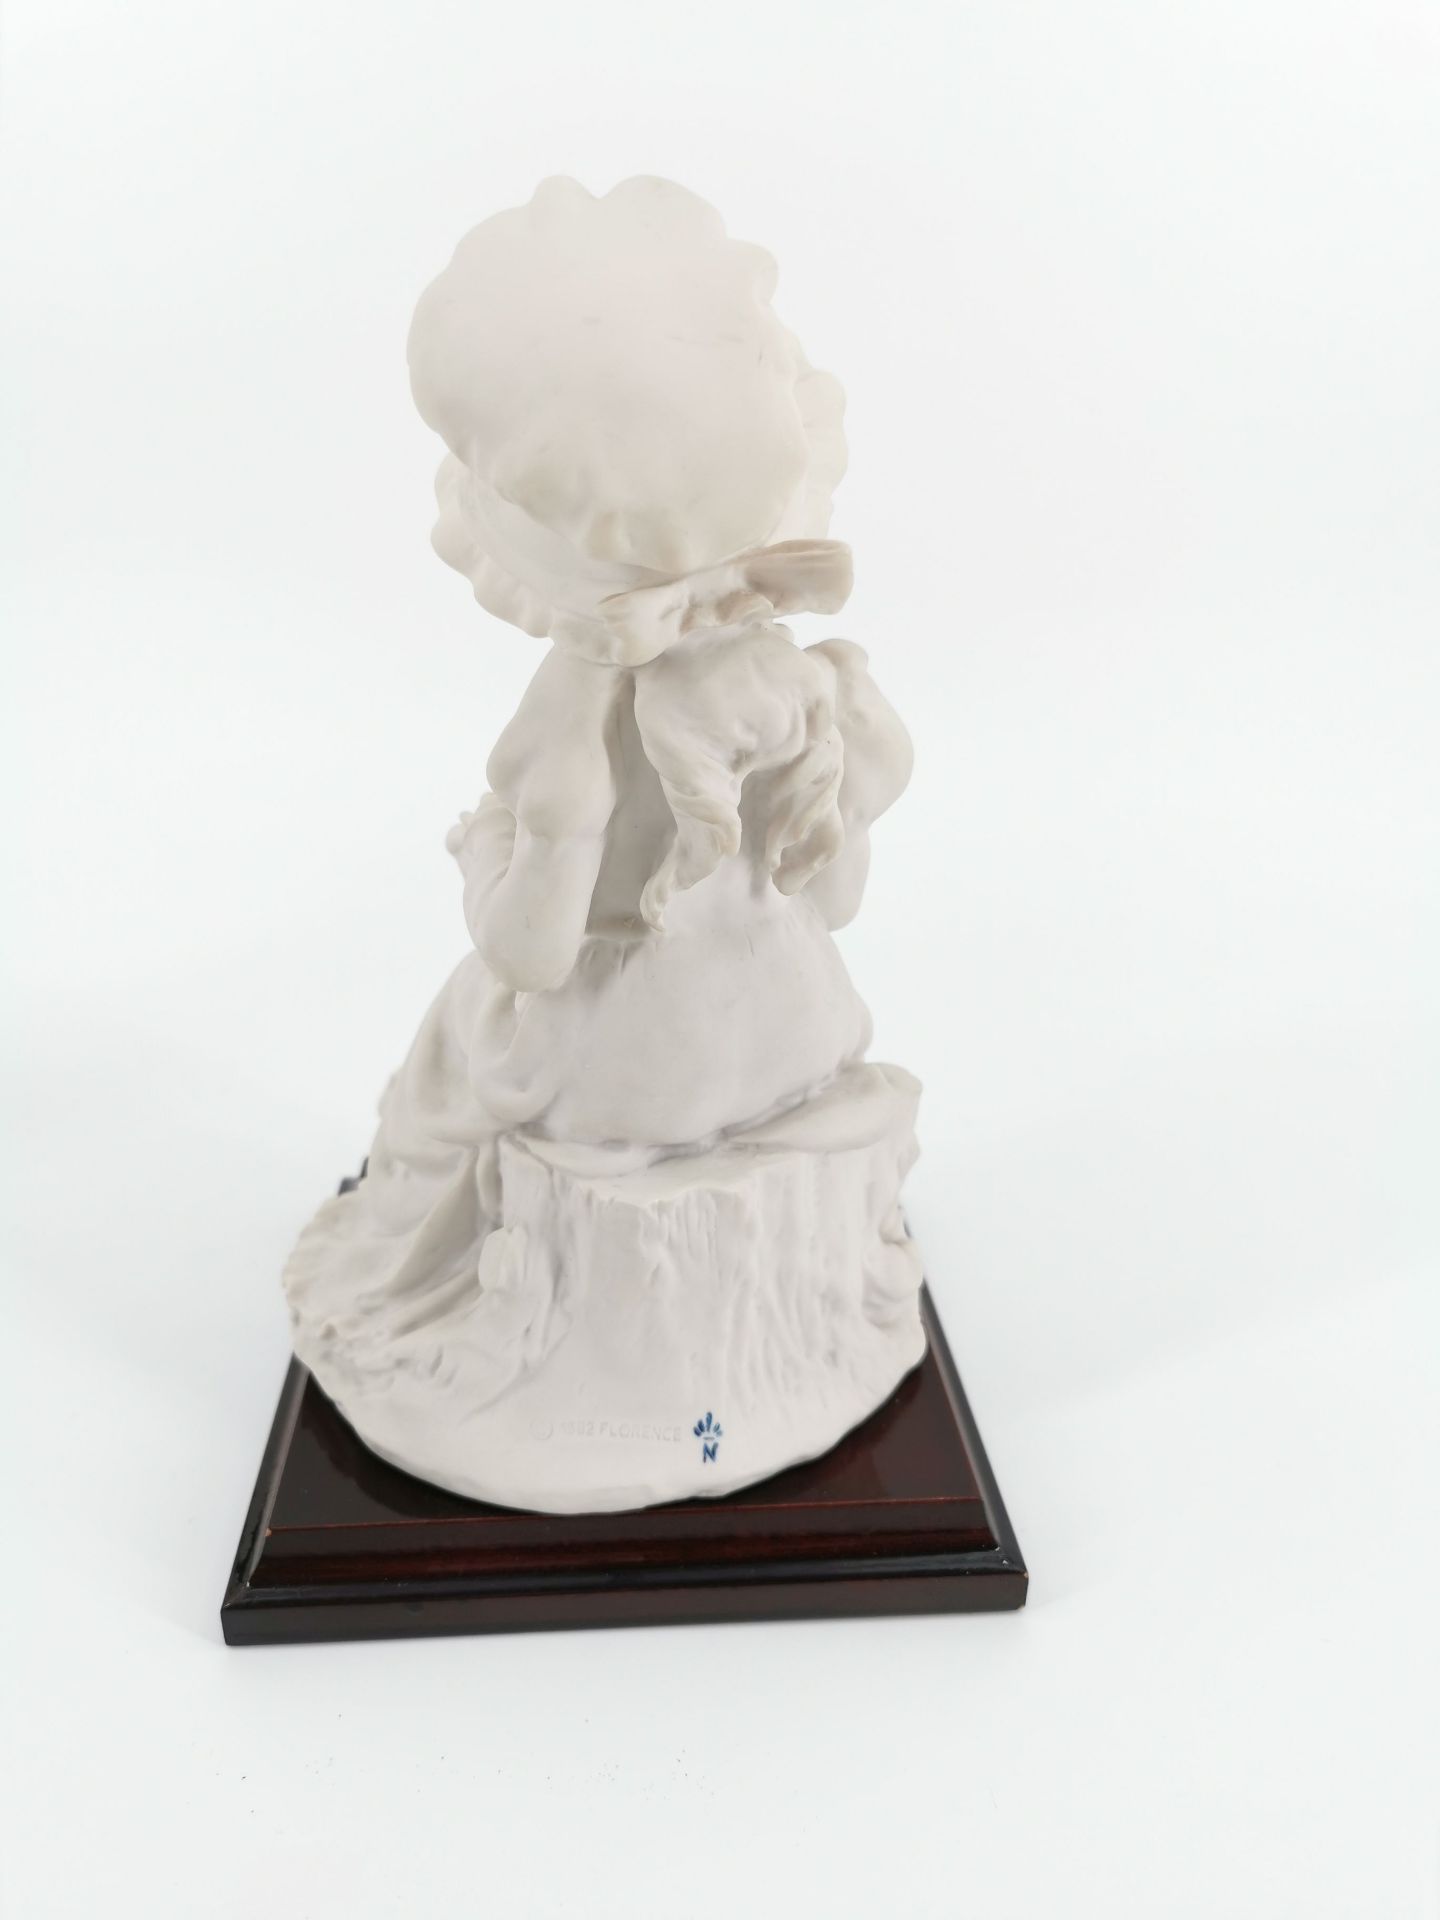 PORCELAIN FIGURE "GIRL WITH CHICKS" - Image 3 of 6